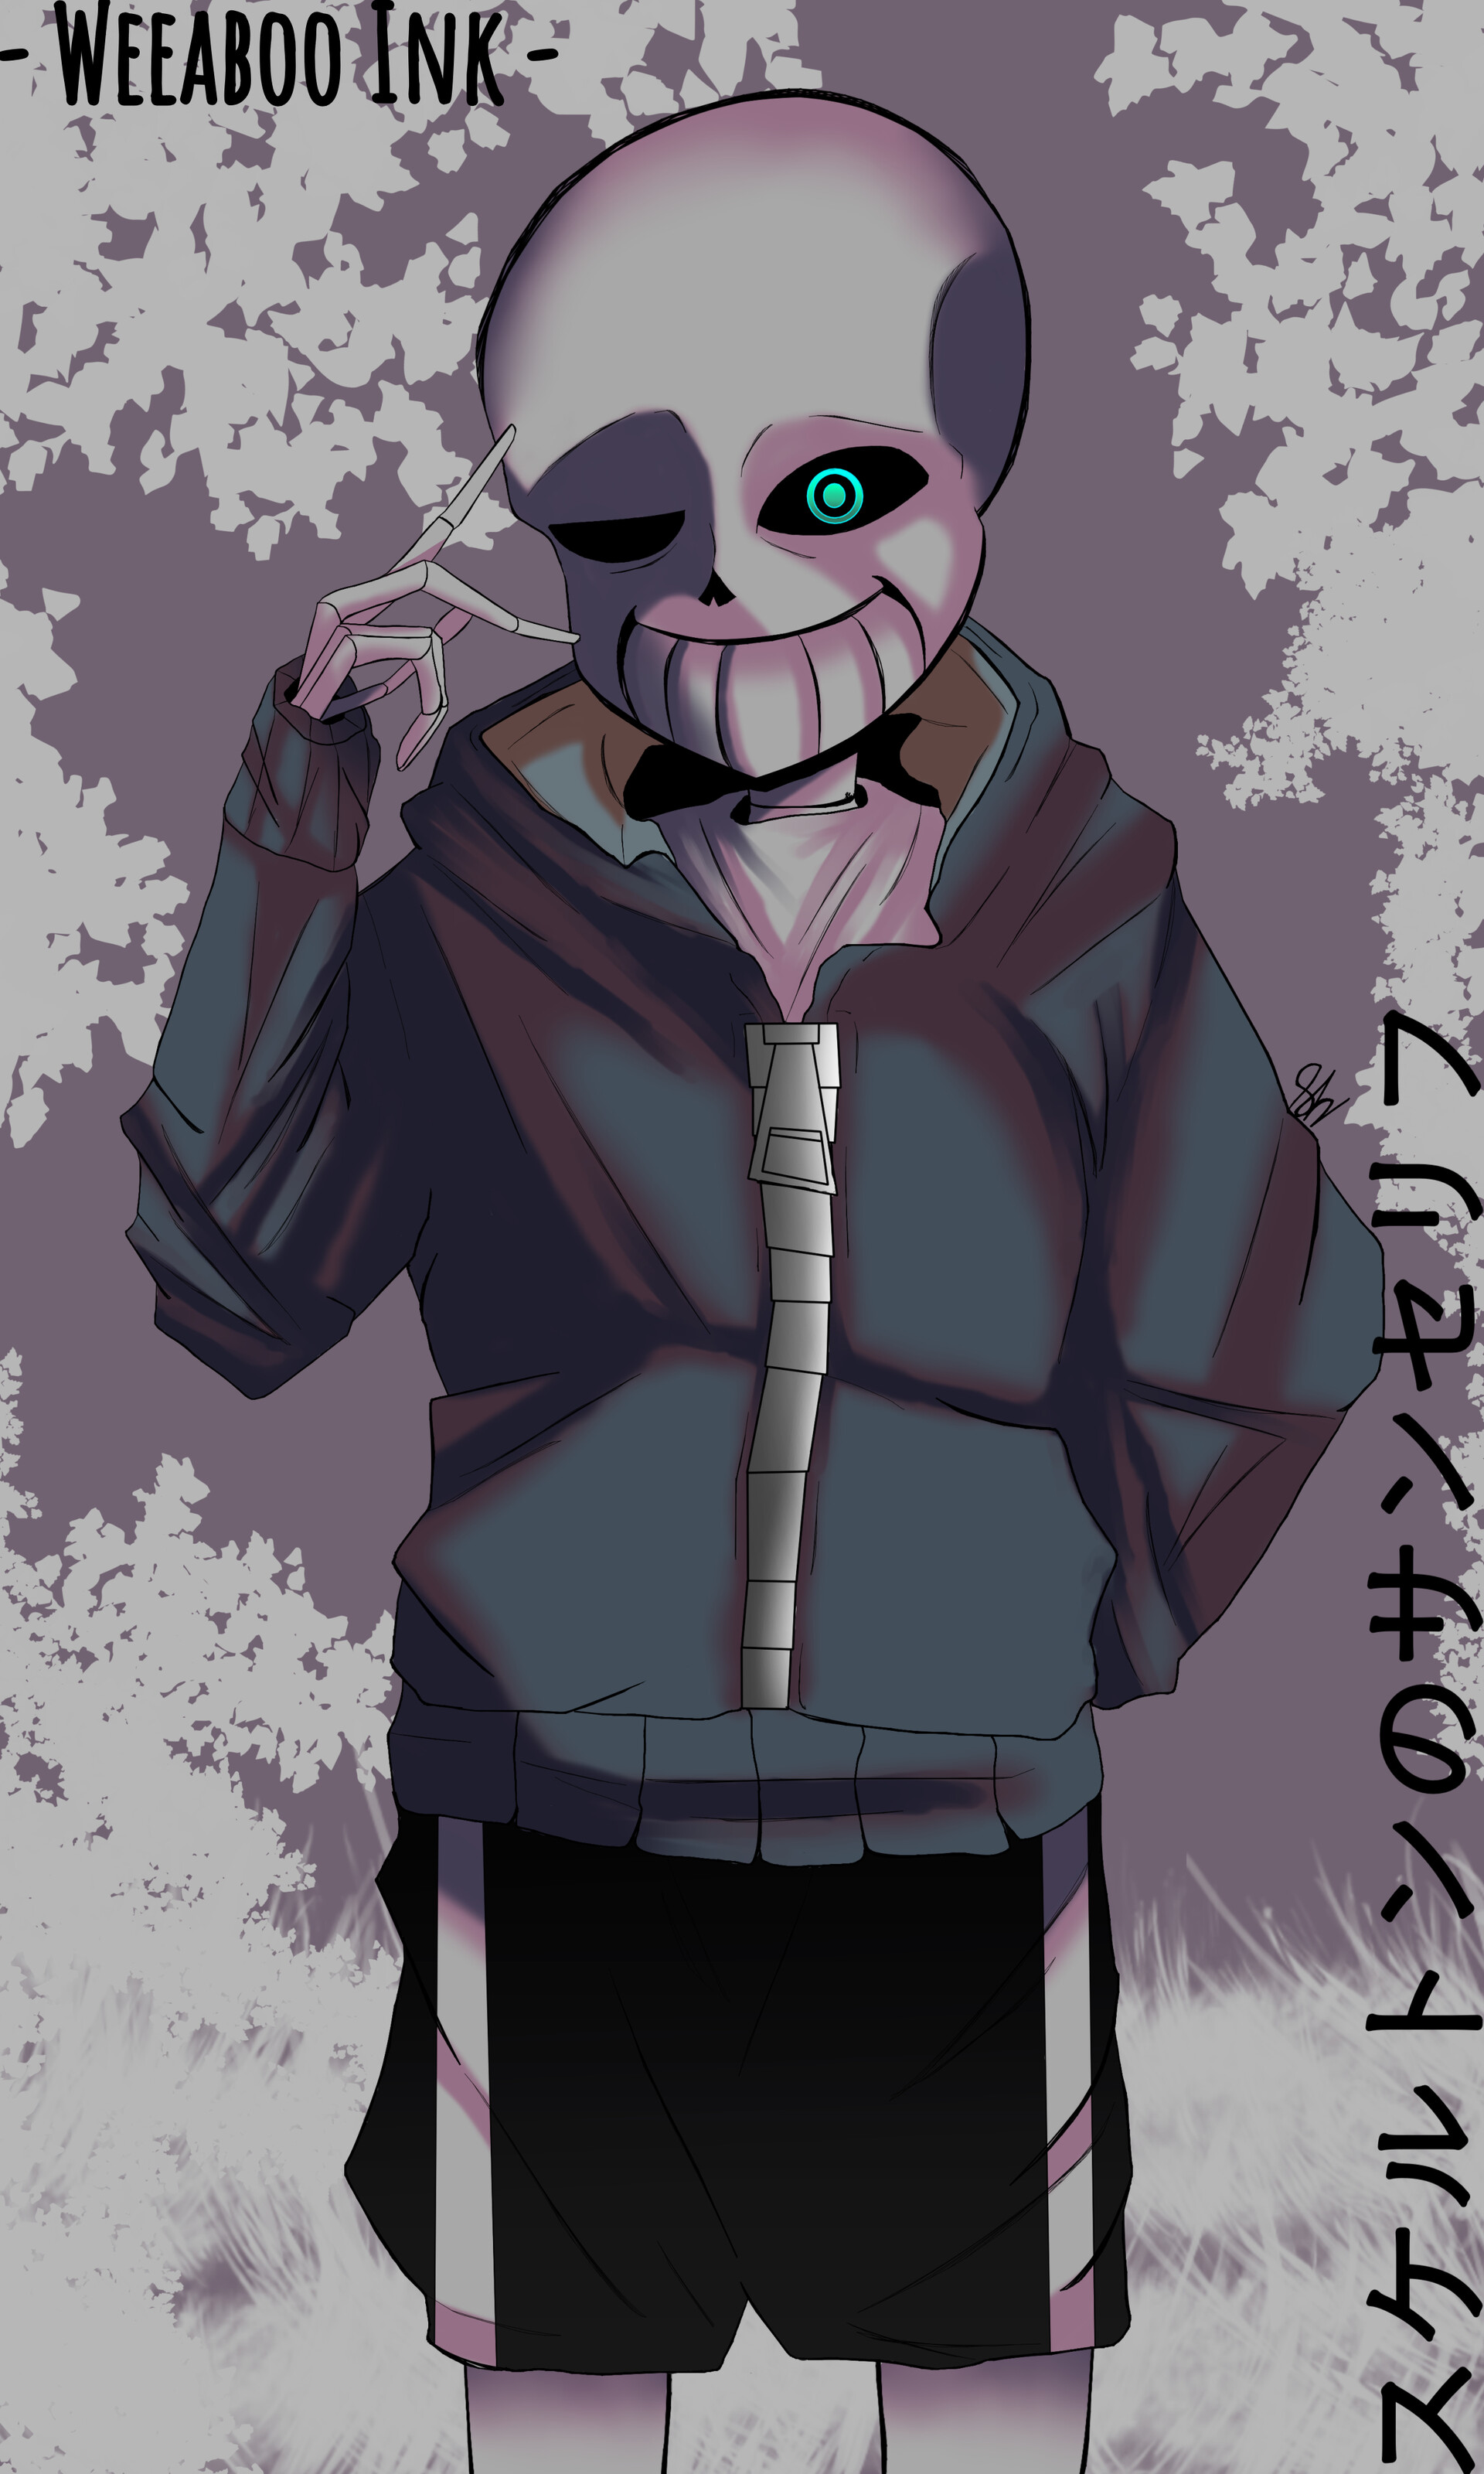 Sans the skeleton, from undertale, anime style